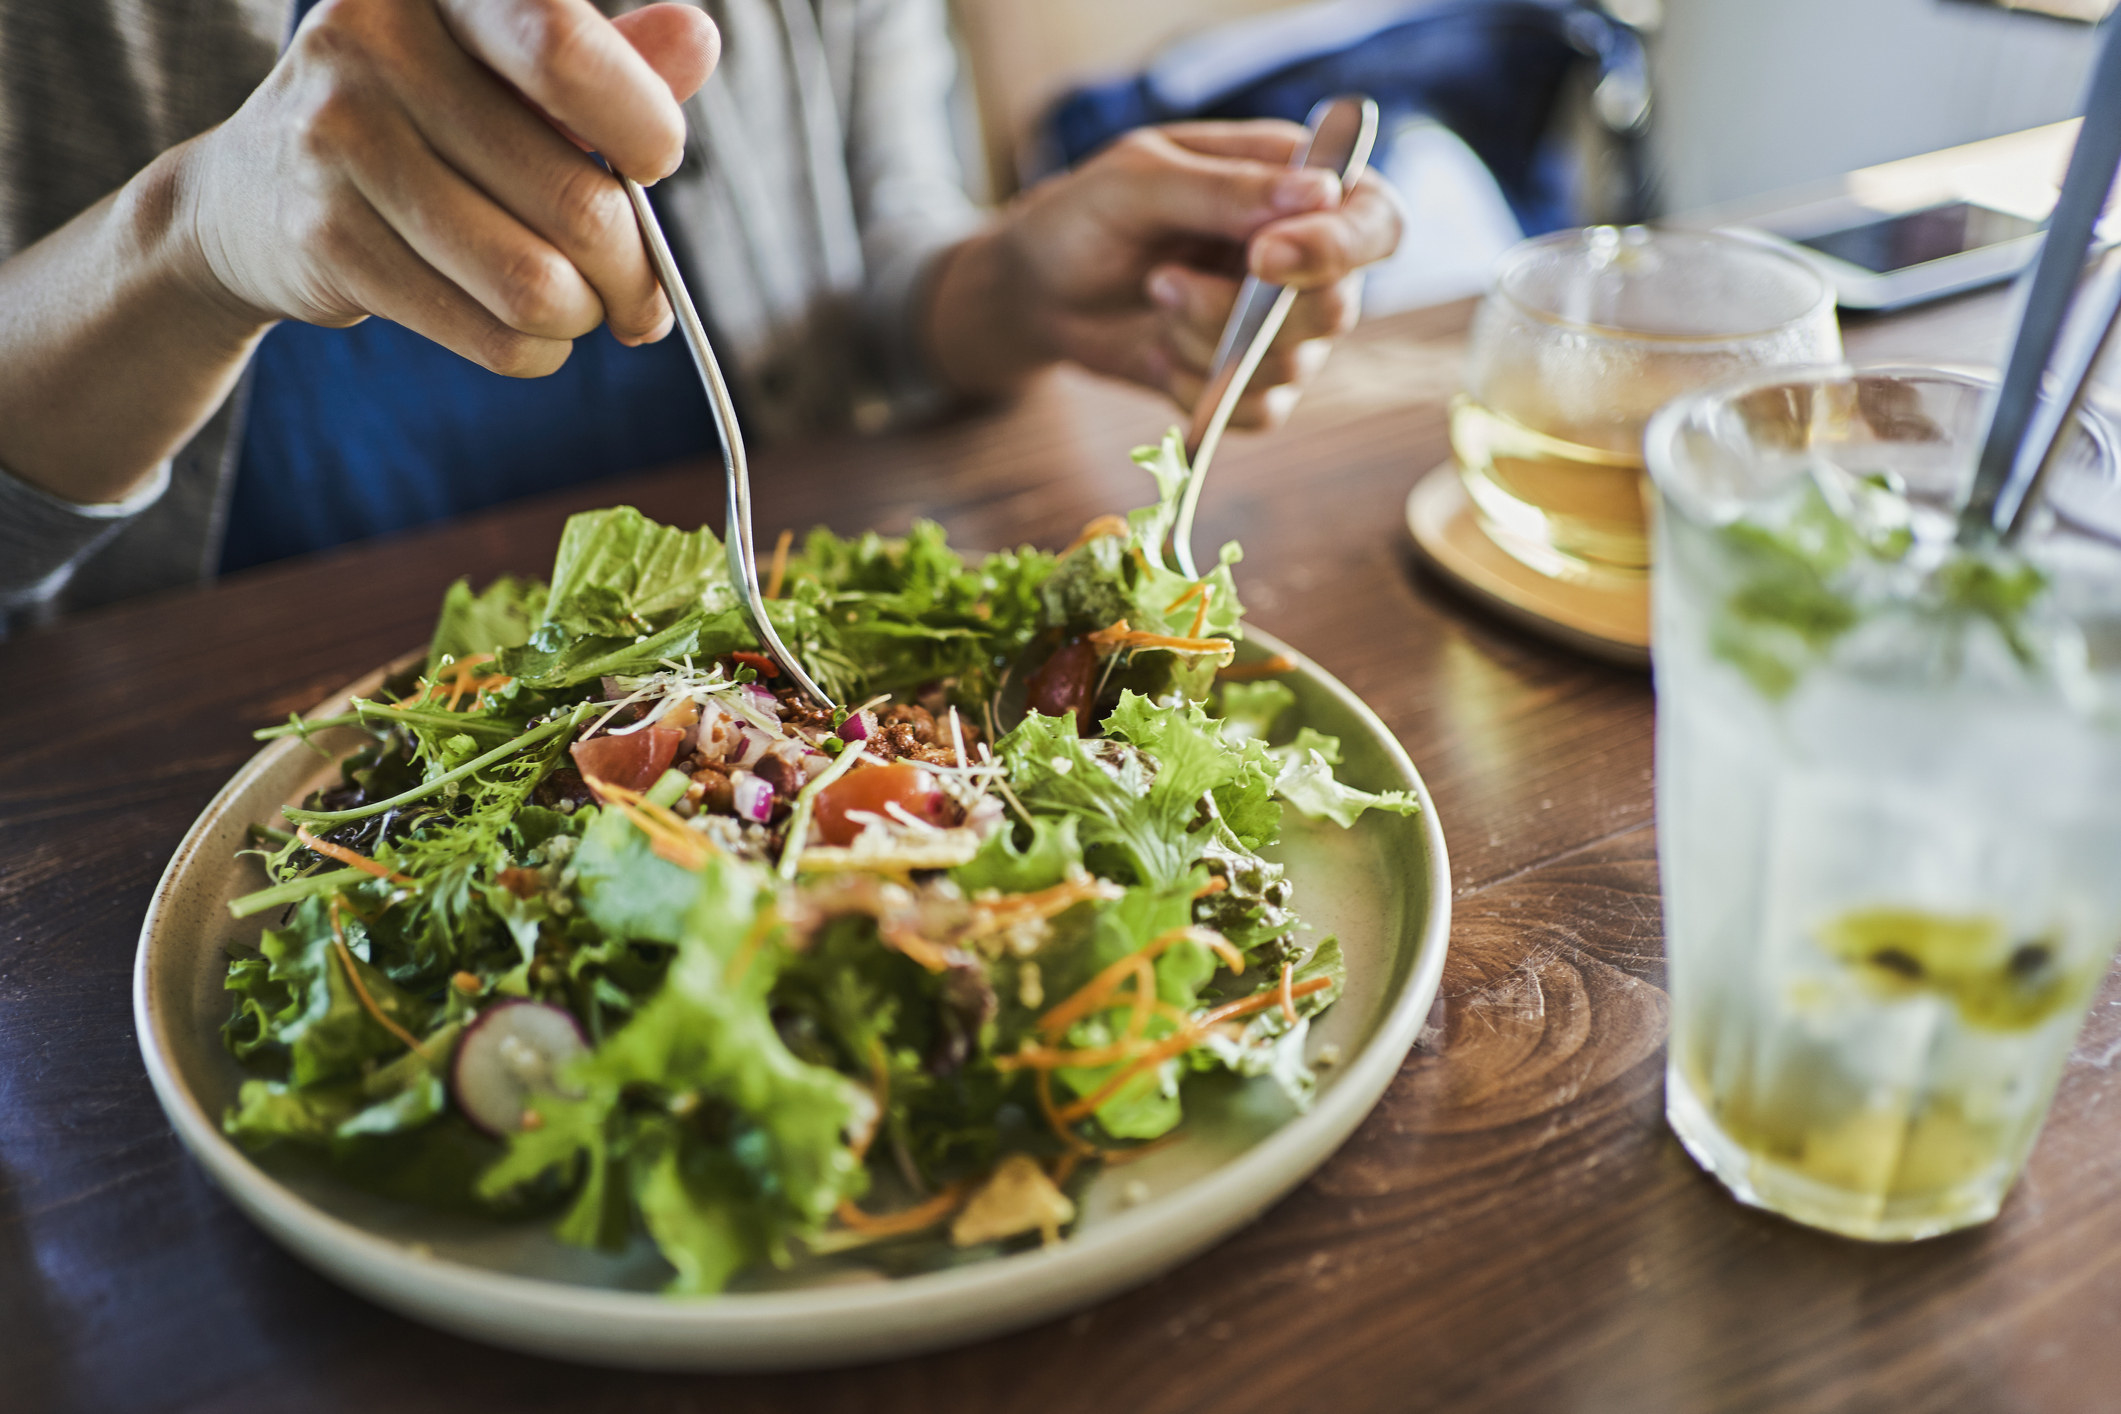 A person tossing their salad on a plate.